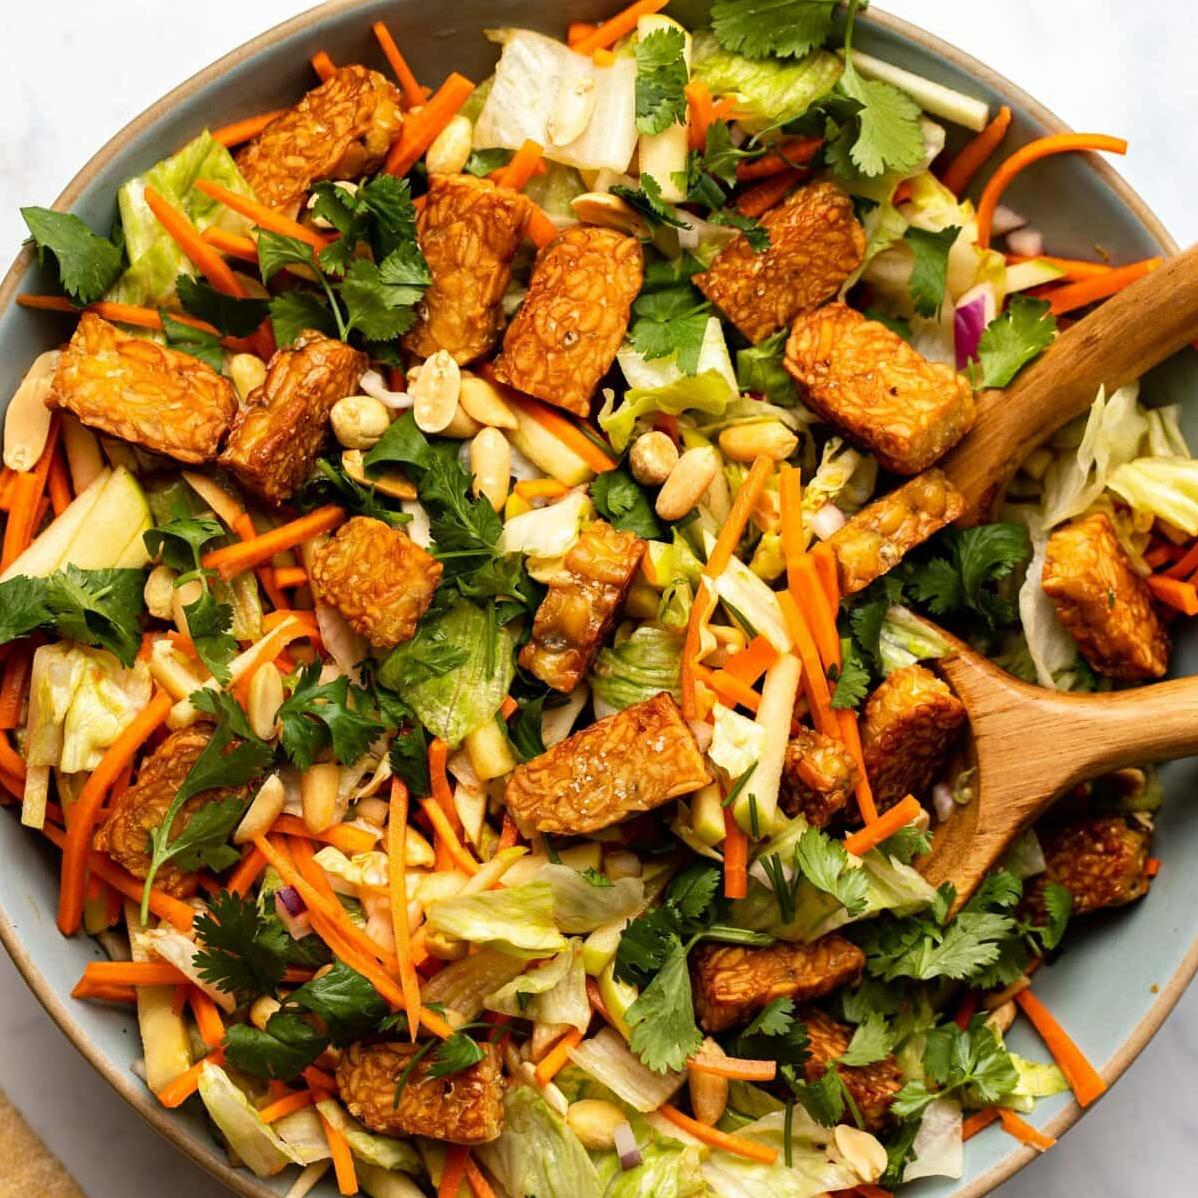  Get ready to fall in love with this colorful vegan tempeh salad!